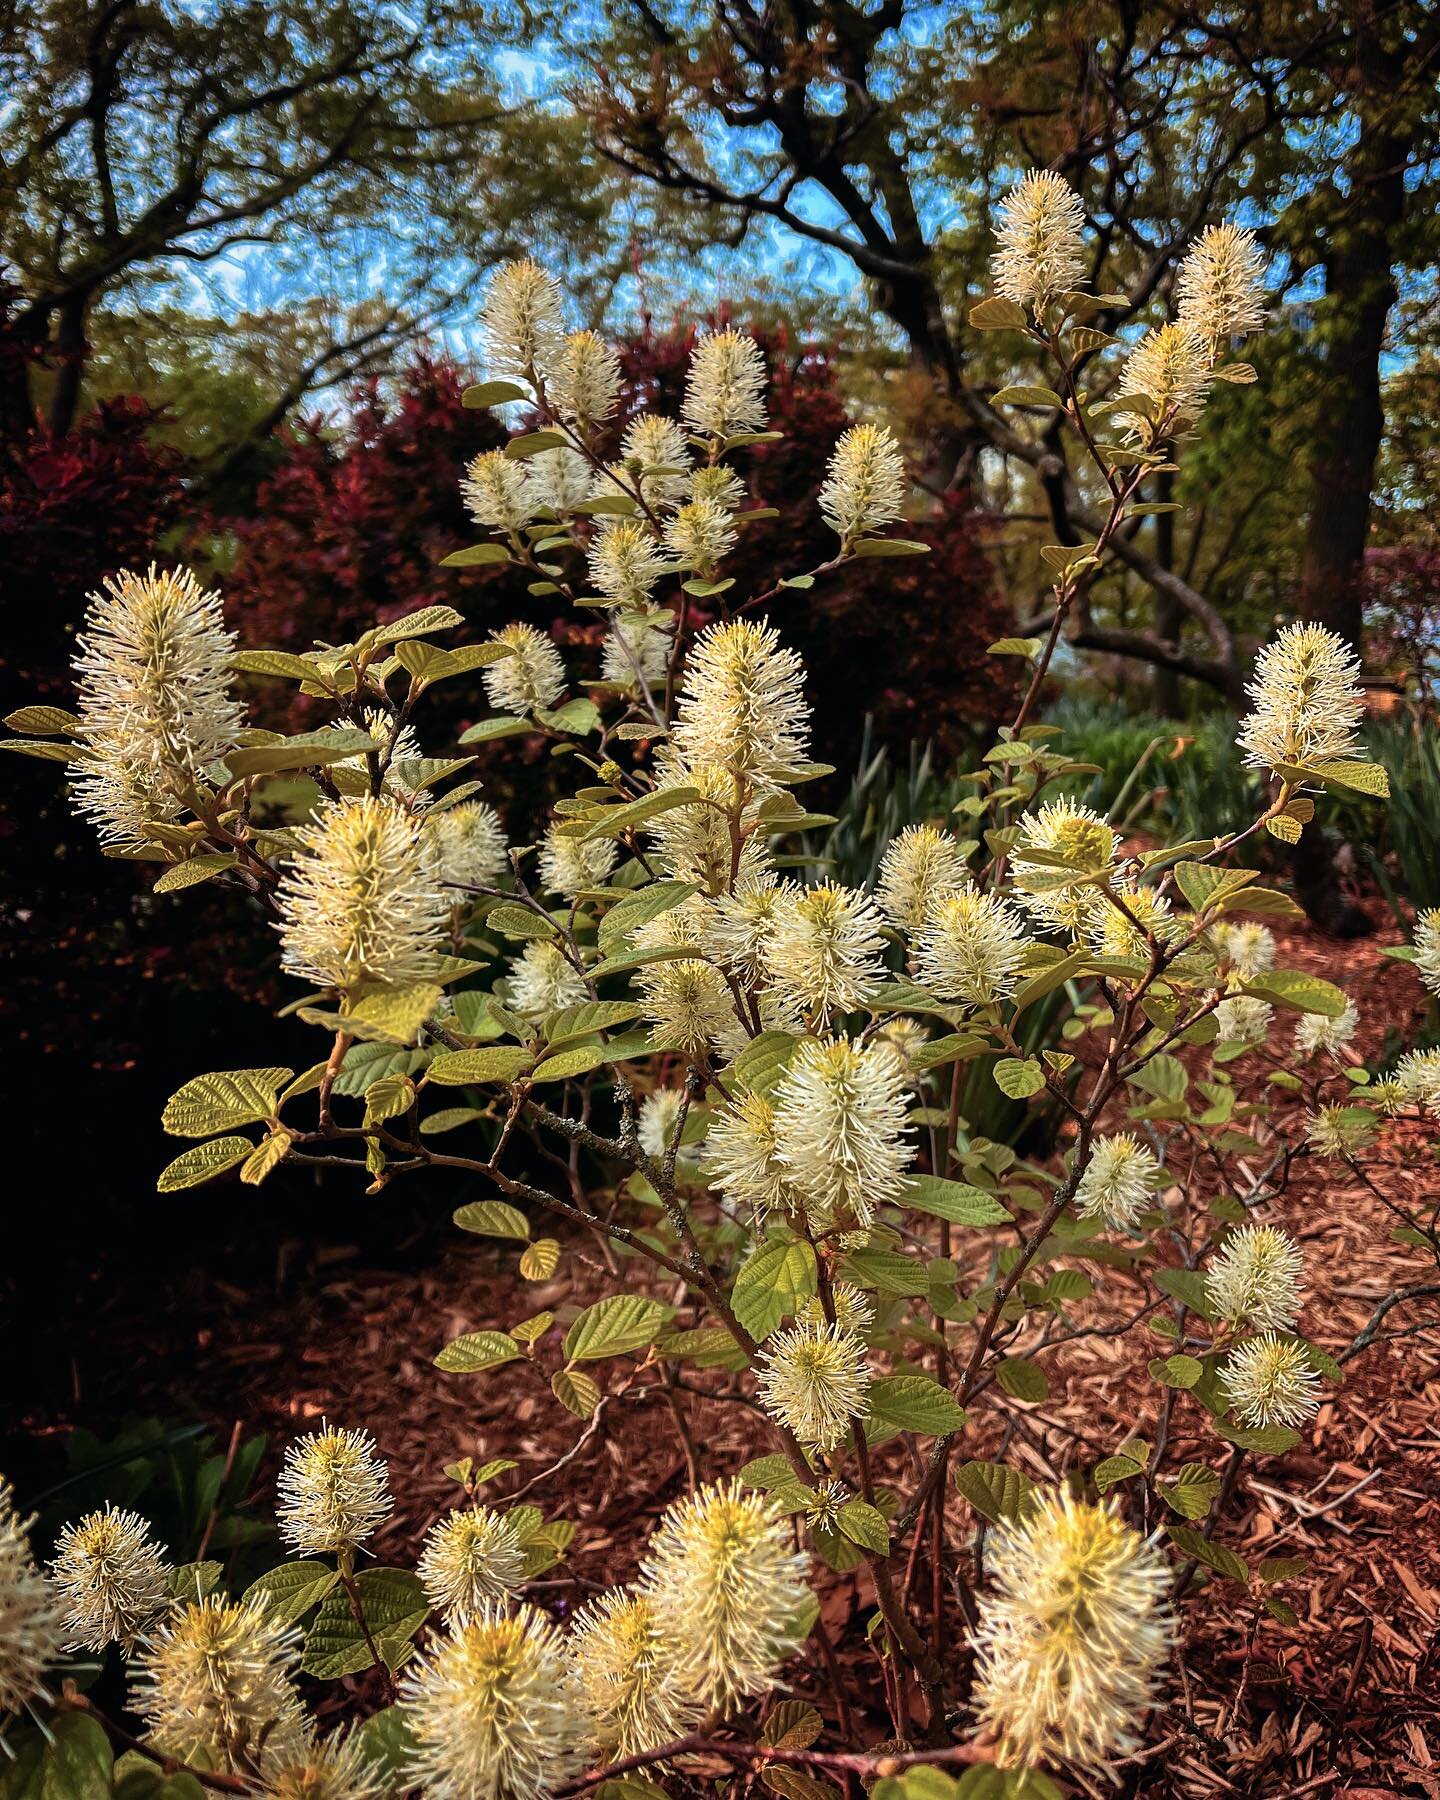 / WITCH ALDER /
.
is one of the common names for Fothergilla gardenii; a most magical shrub. This particular one is a smaller compact variety growing to no higher or wider than 3 feet. 
.
This shrub was familiar to me, but I fell in love with it last